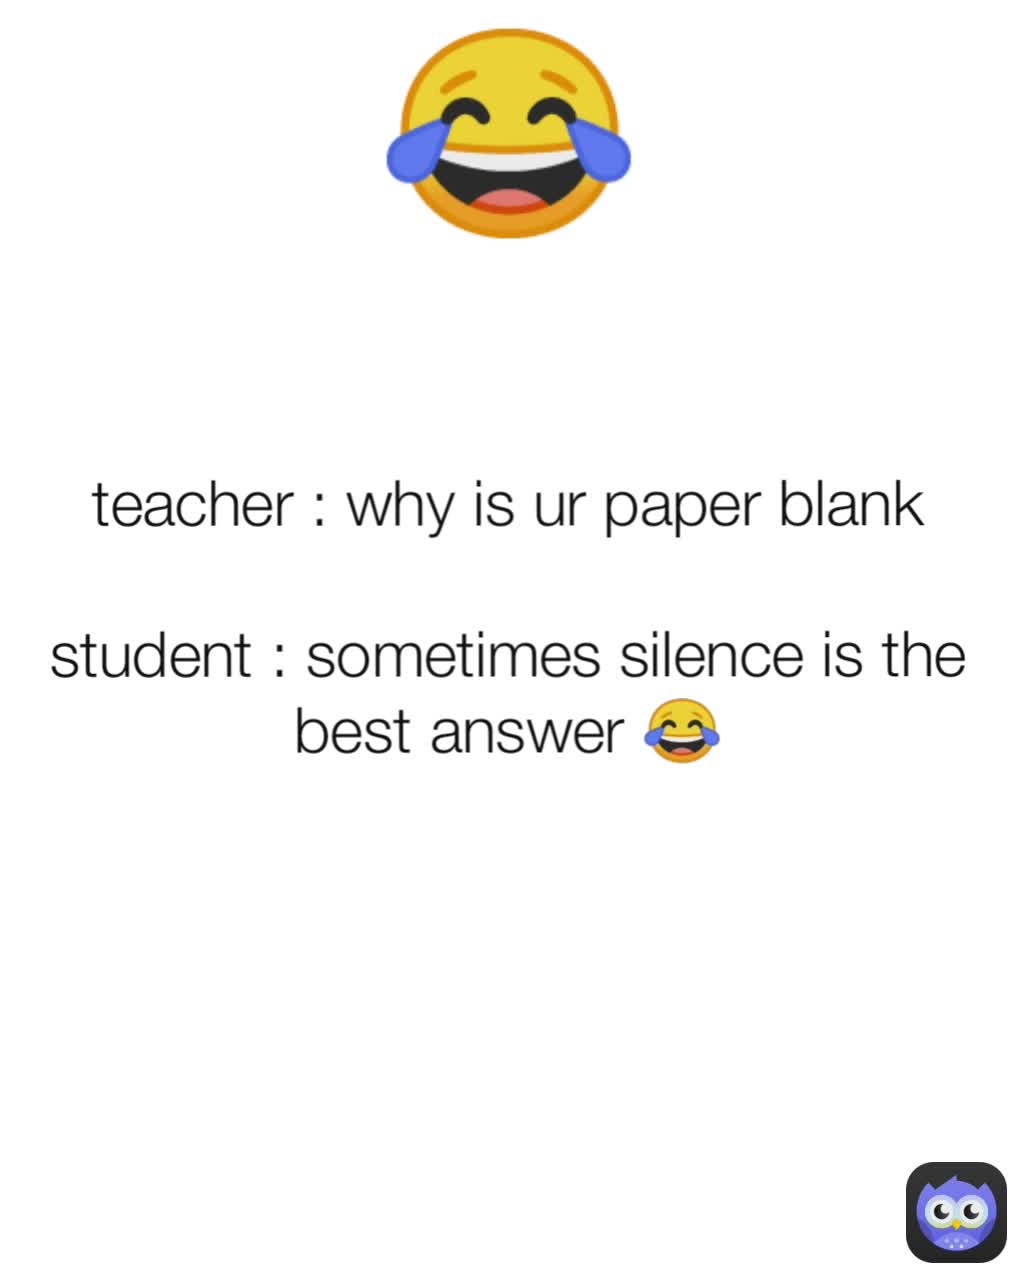 teacher : why is ur paper blank

student : sometimes silence is the best answer 😂 😂